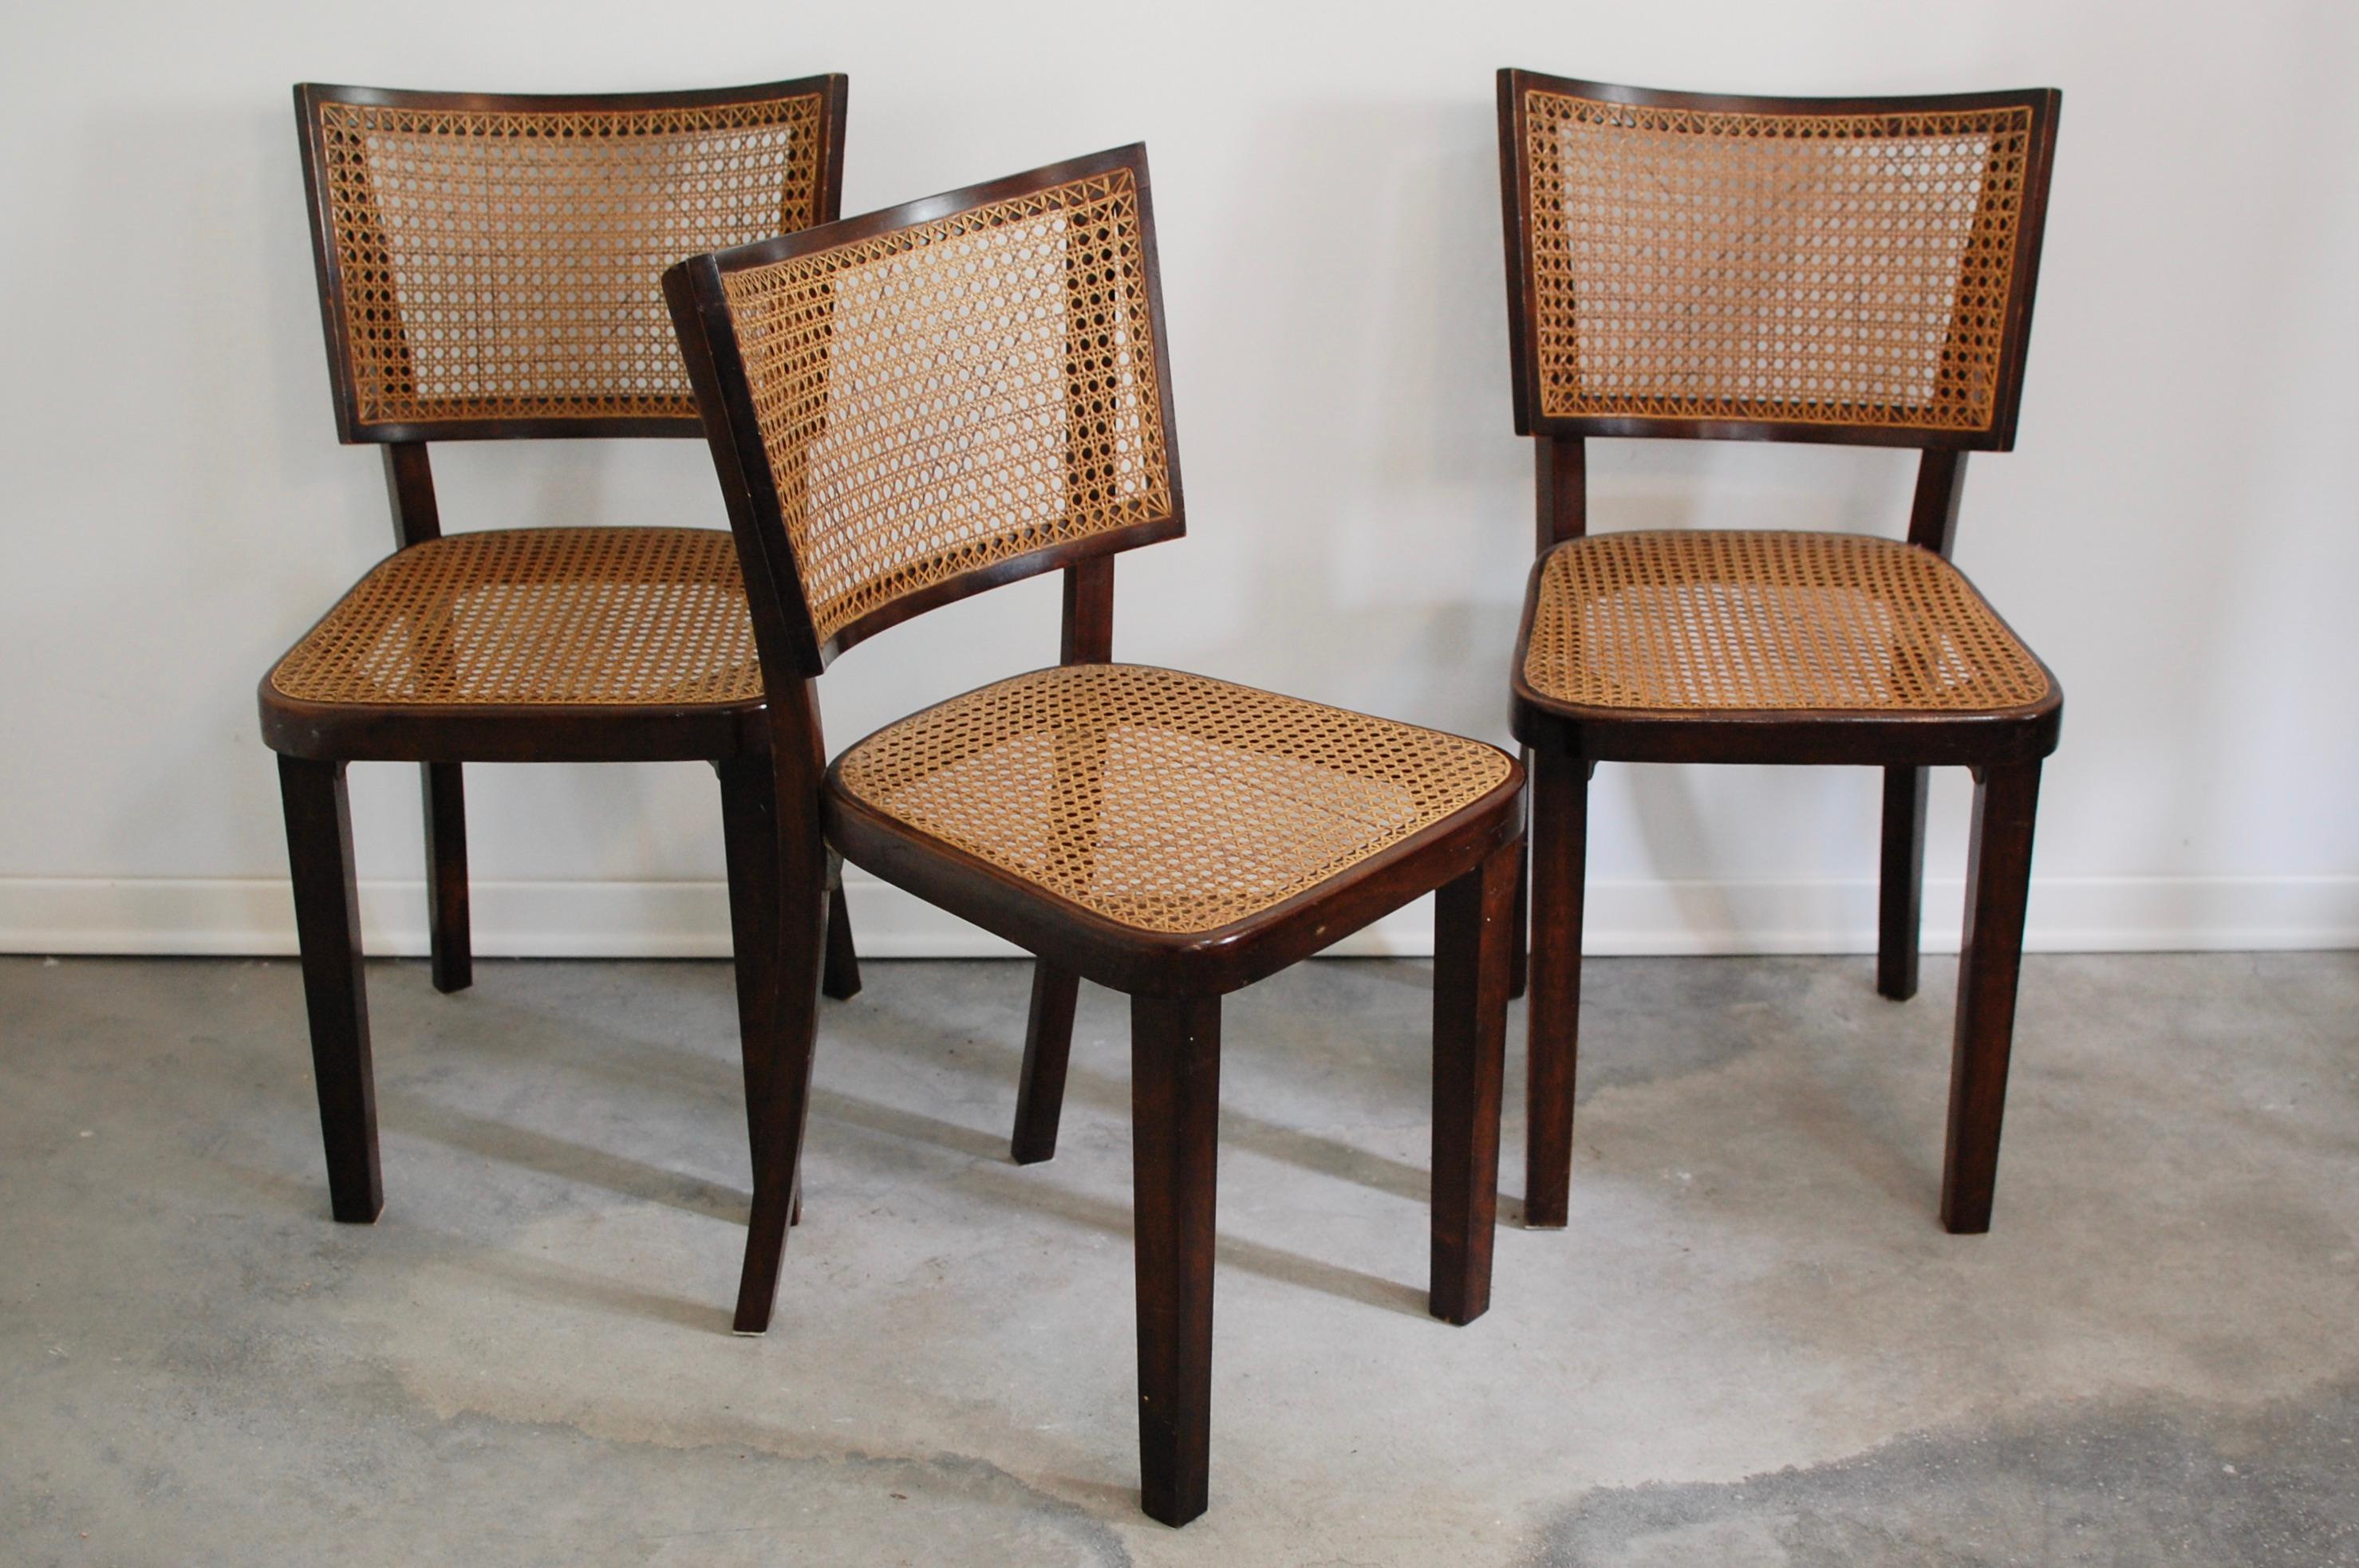 Rare Art Deco dining chairs, sewed-cane seat and back
Material: wood, sewed cane
Period: 1920s
Style: Art Deco
Condition: excellent original condition.
 